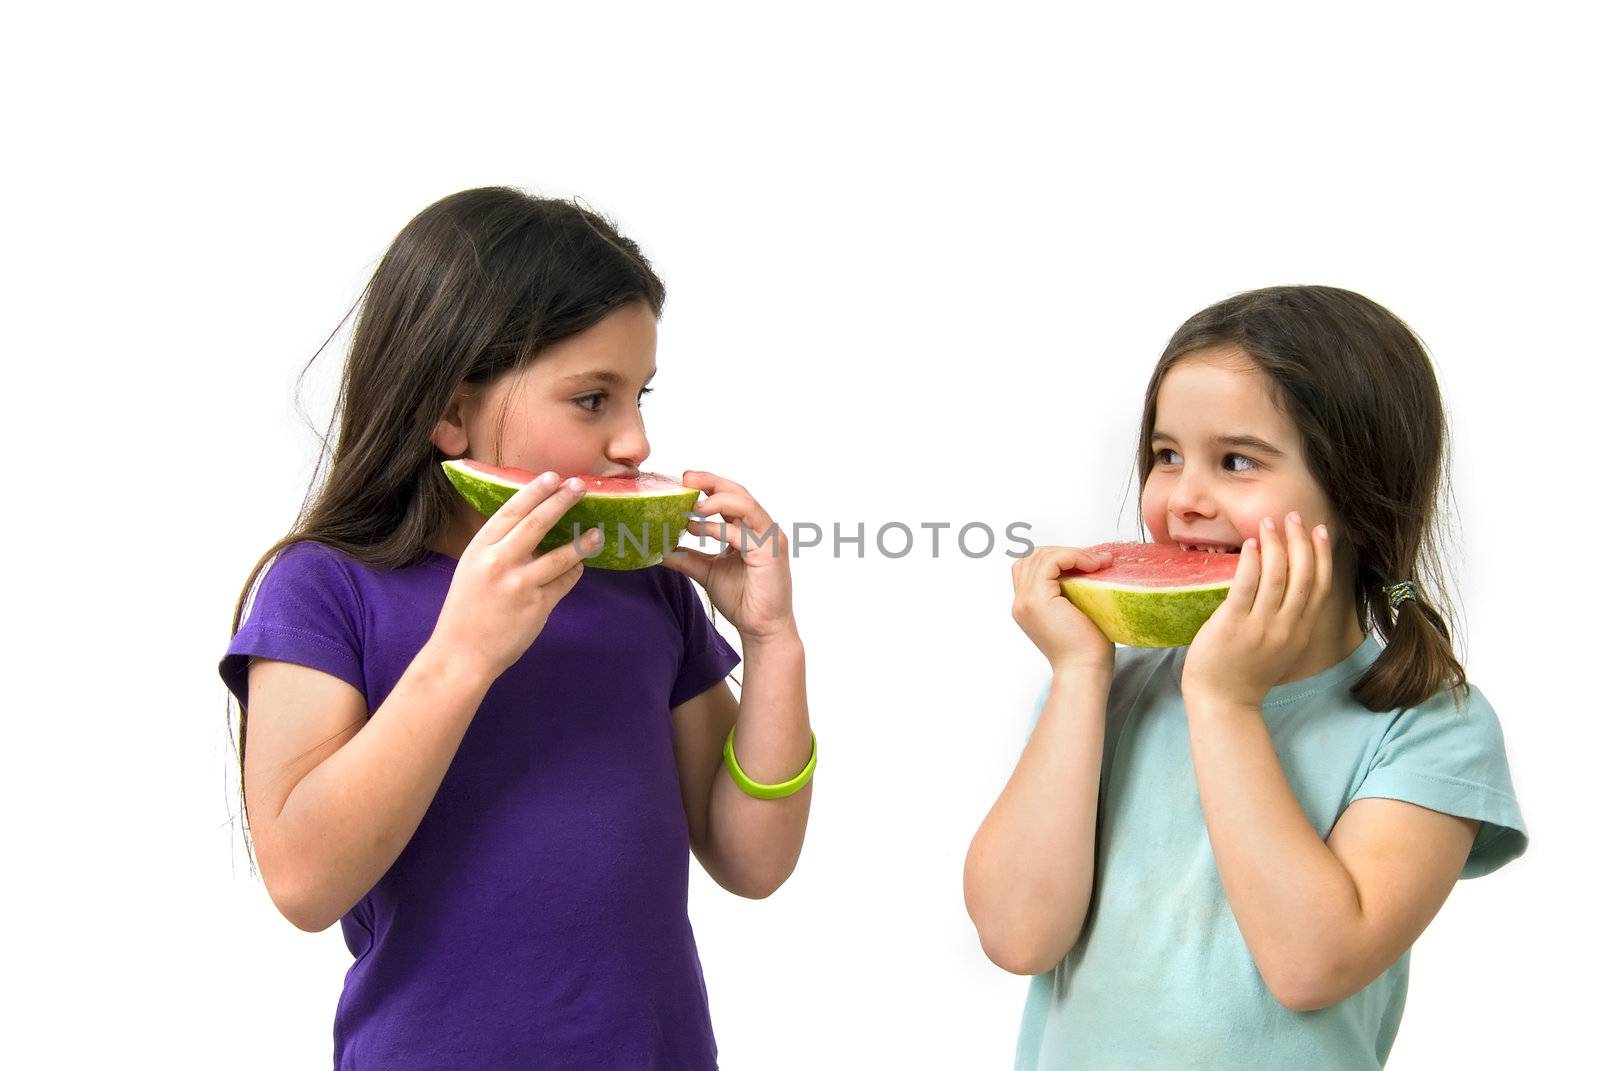 Two girls eating Watermelon isolated on white background